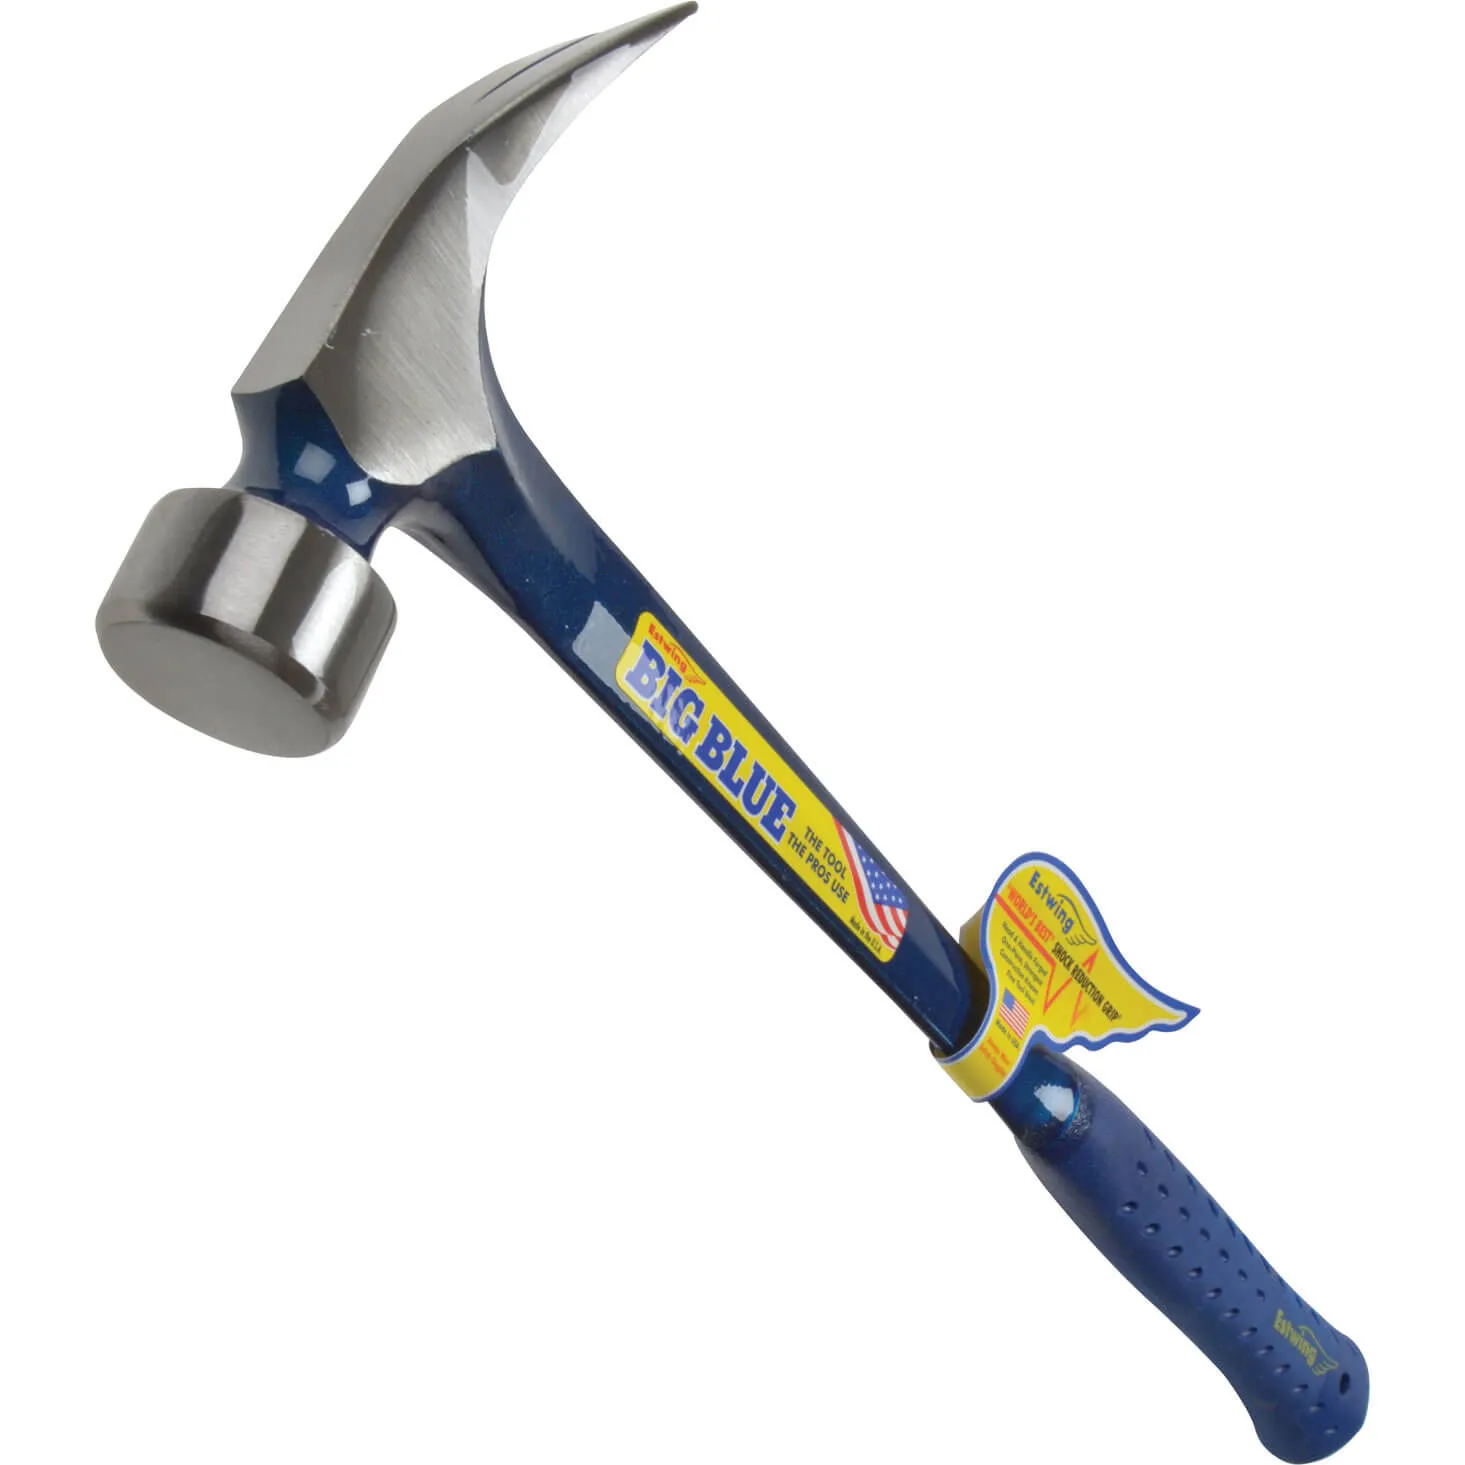 Estwing Straight Claw Framing Hammer - 700g